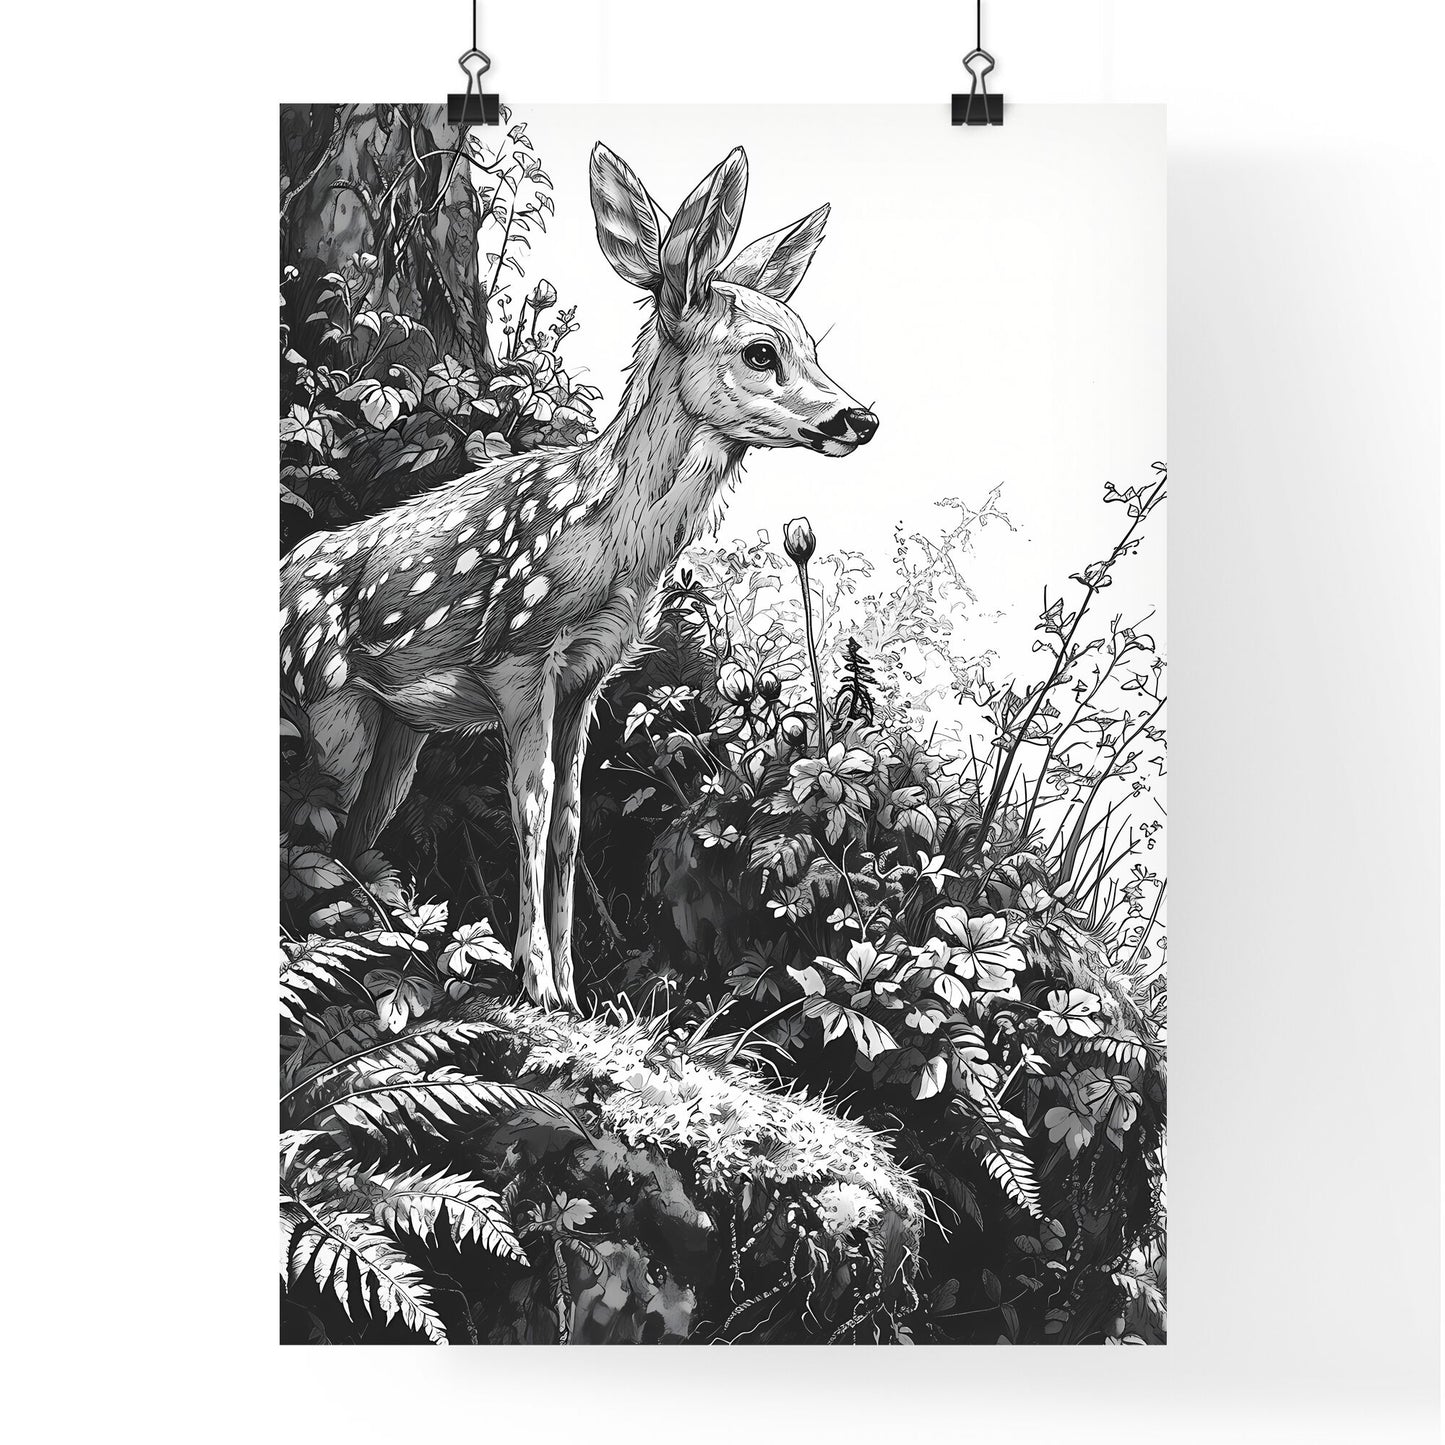 A Poster of deer in the woods - A Black And White Drawing Of A Deer Standing In A Forest Default Title